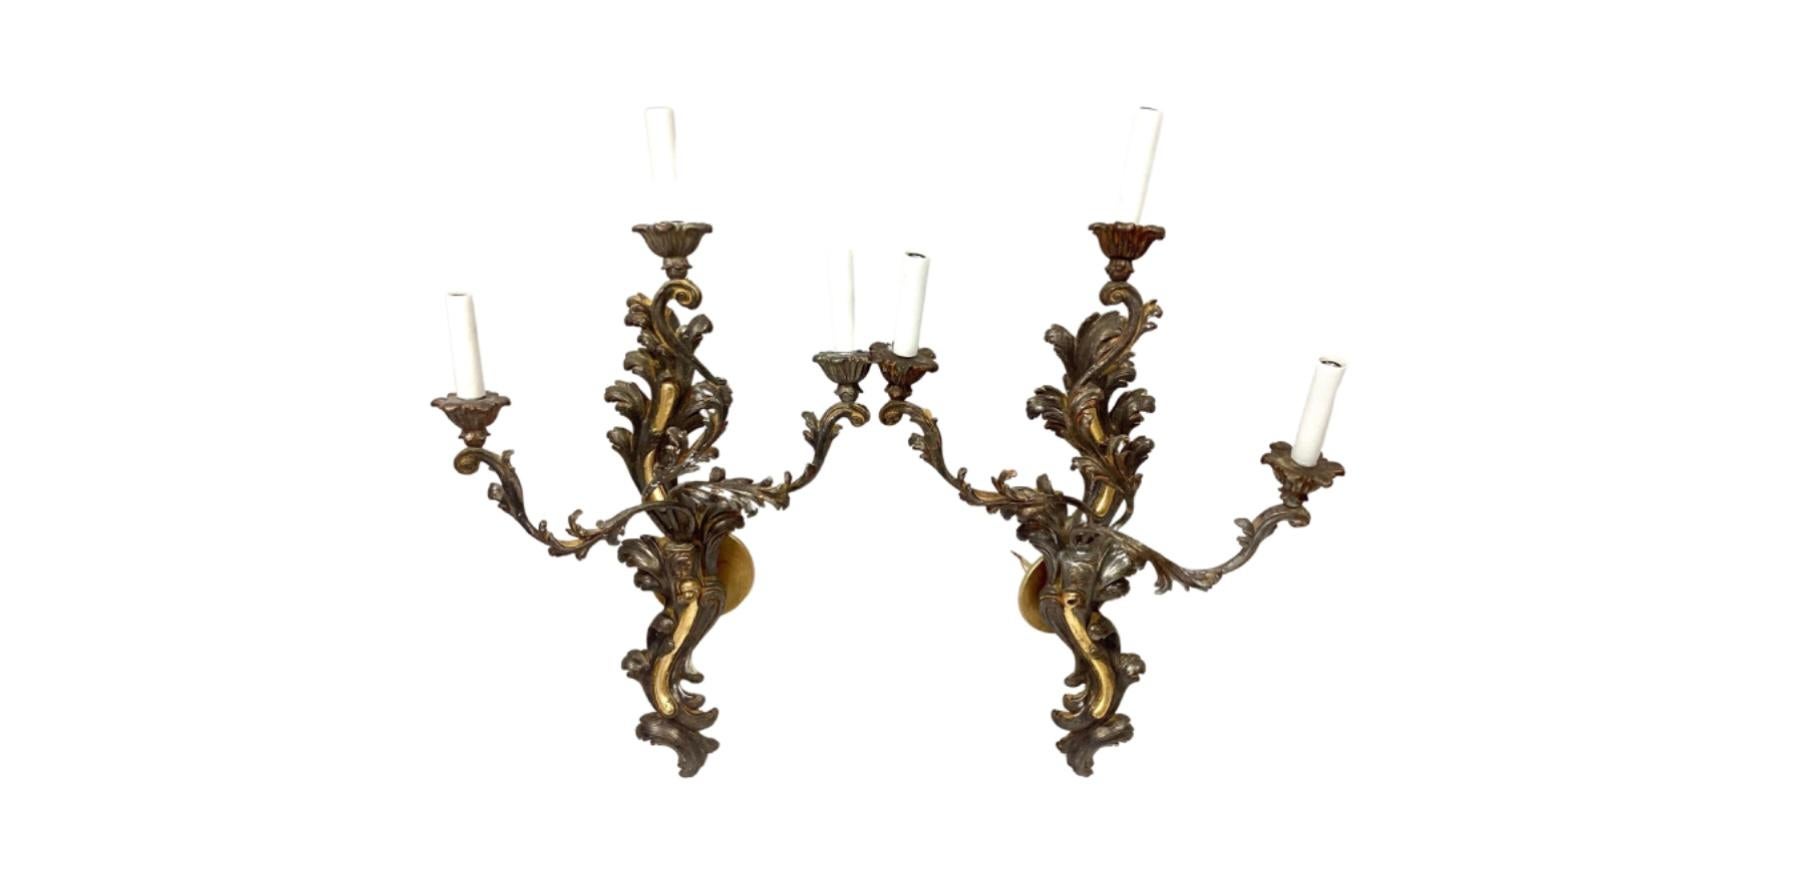 Decorative pair of large ornate Italian wall lights/sconces. Contrasting Gold and Silver giltwood and painted toleware scrolling on triple arm lights. Fully rewired. Stamped with 